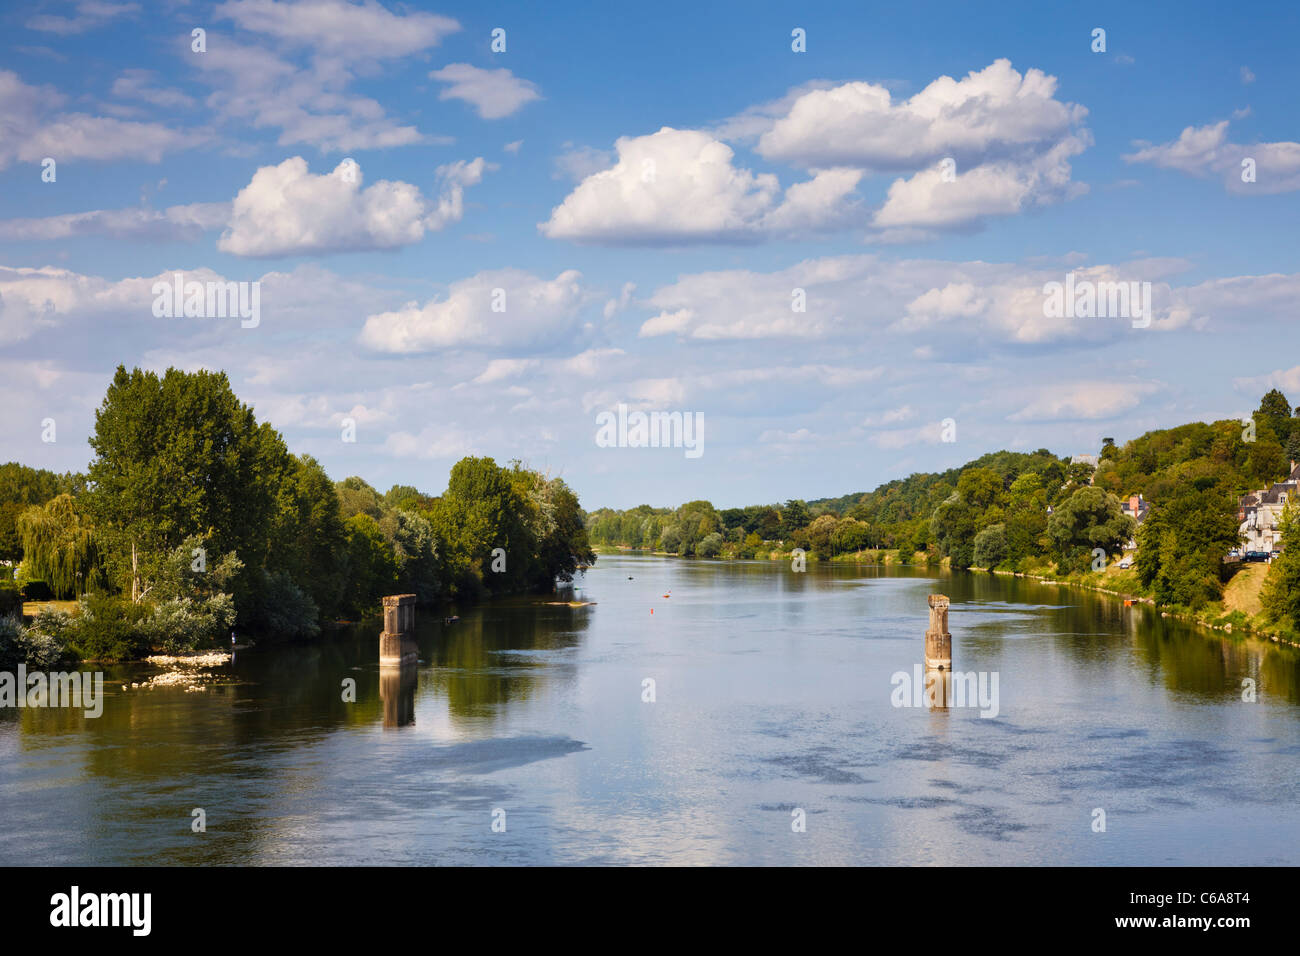 The Loire River at Amboise, Indre et Loire, France, Europe with pillars of an ancient destroyed bridge Stock Photo